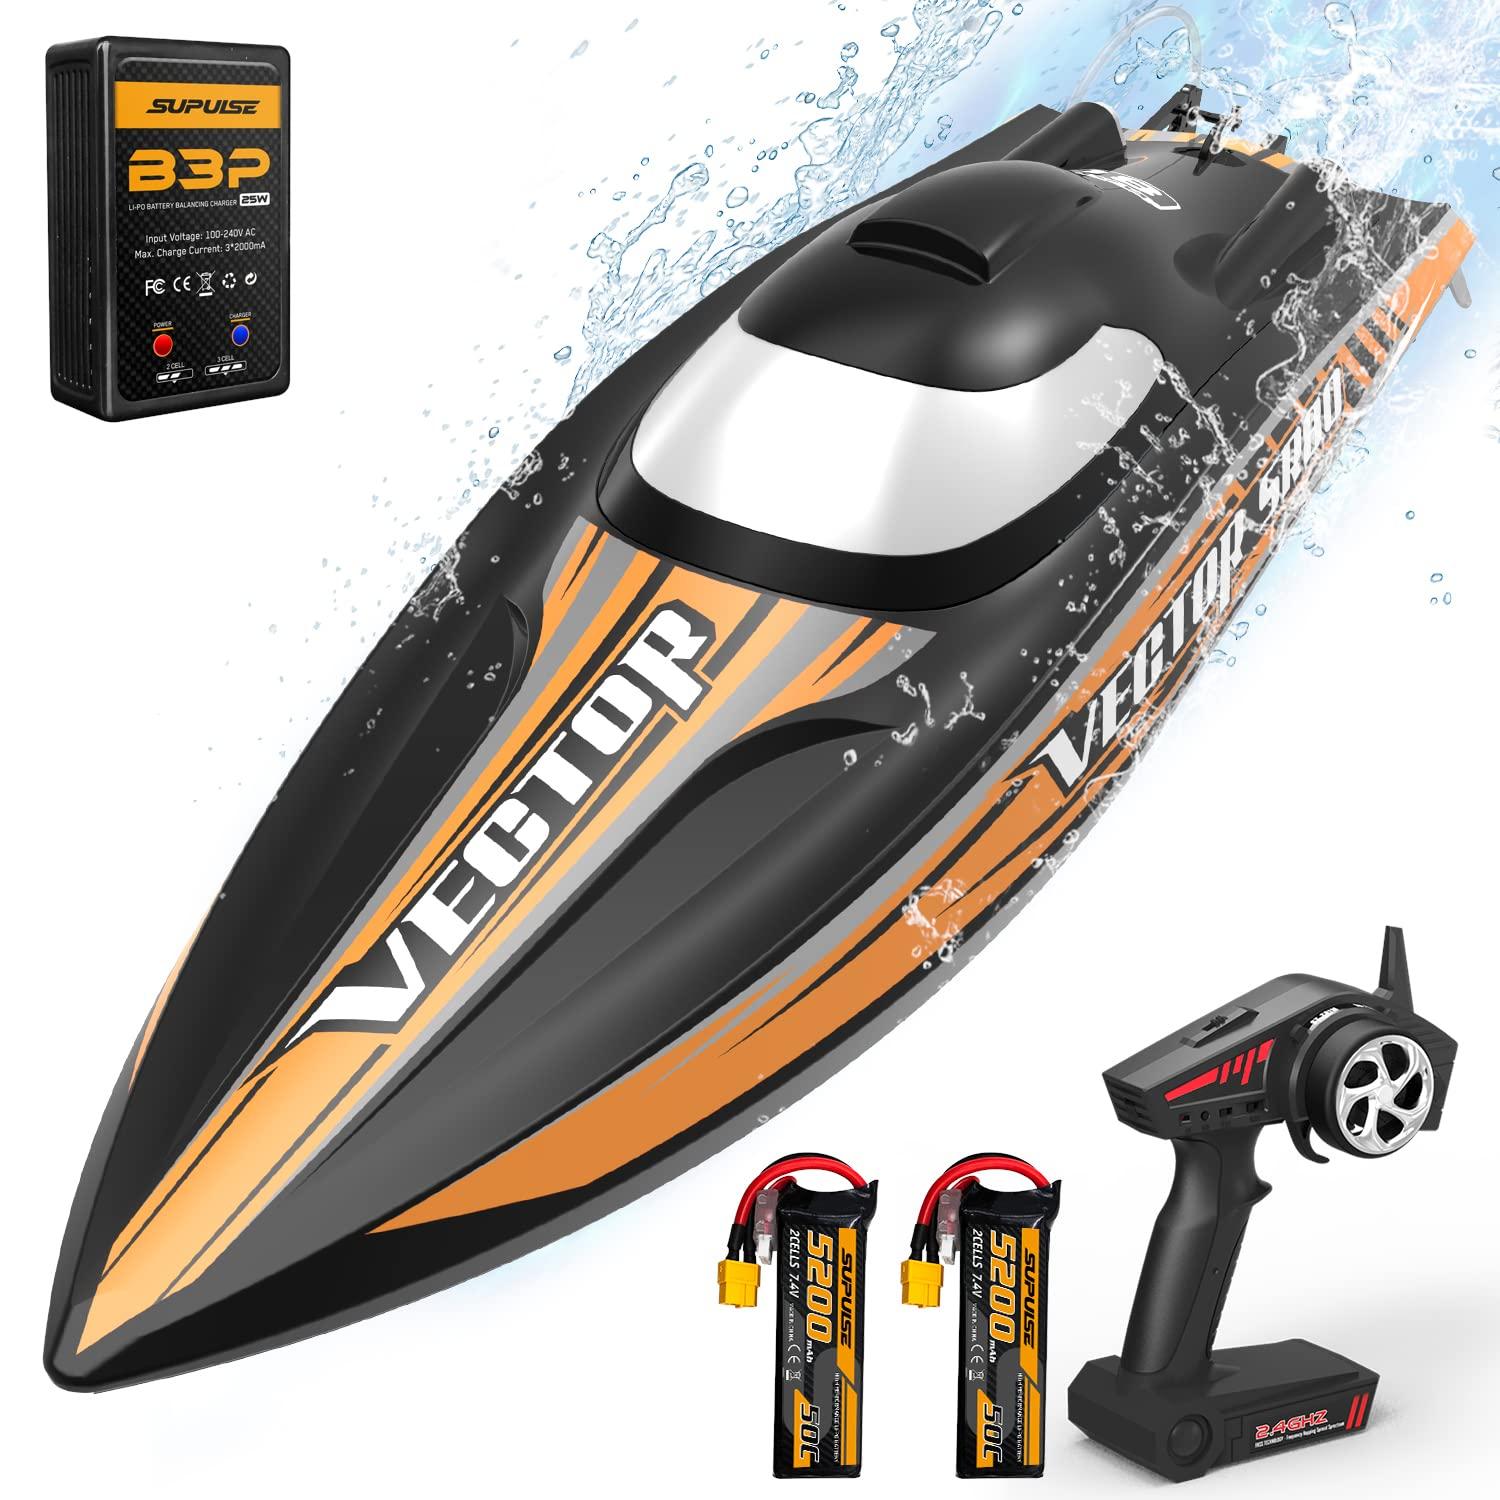 Fast Remote Boat: Choosing Between Electric and Gas Power Sources for Your Fast Remote Boat